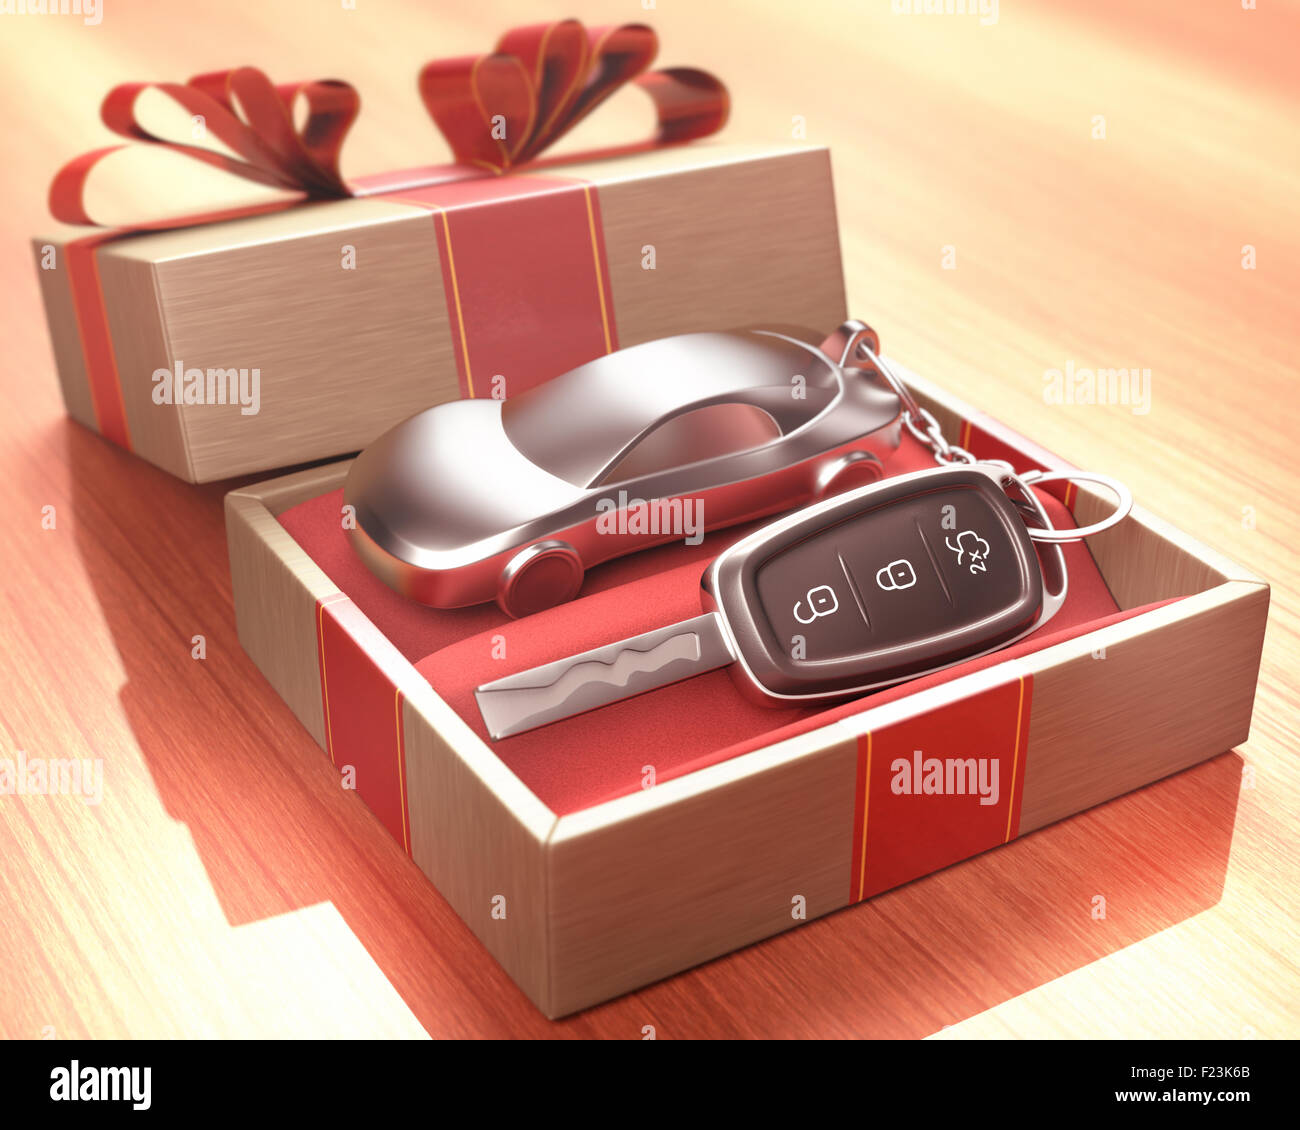 Car key inside a gift box with a red ribbon tied up on the cover. Depth of field with focus on the key button. Stock Photo